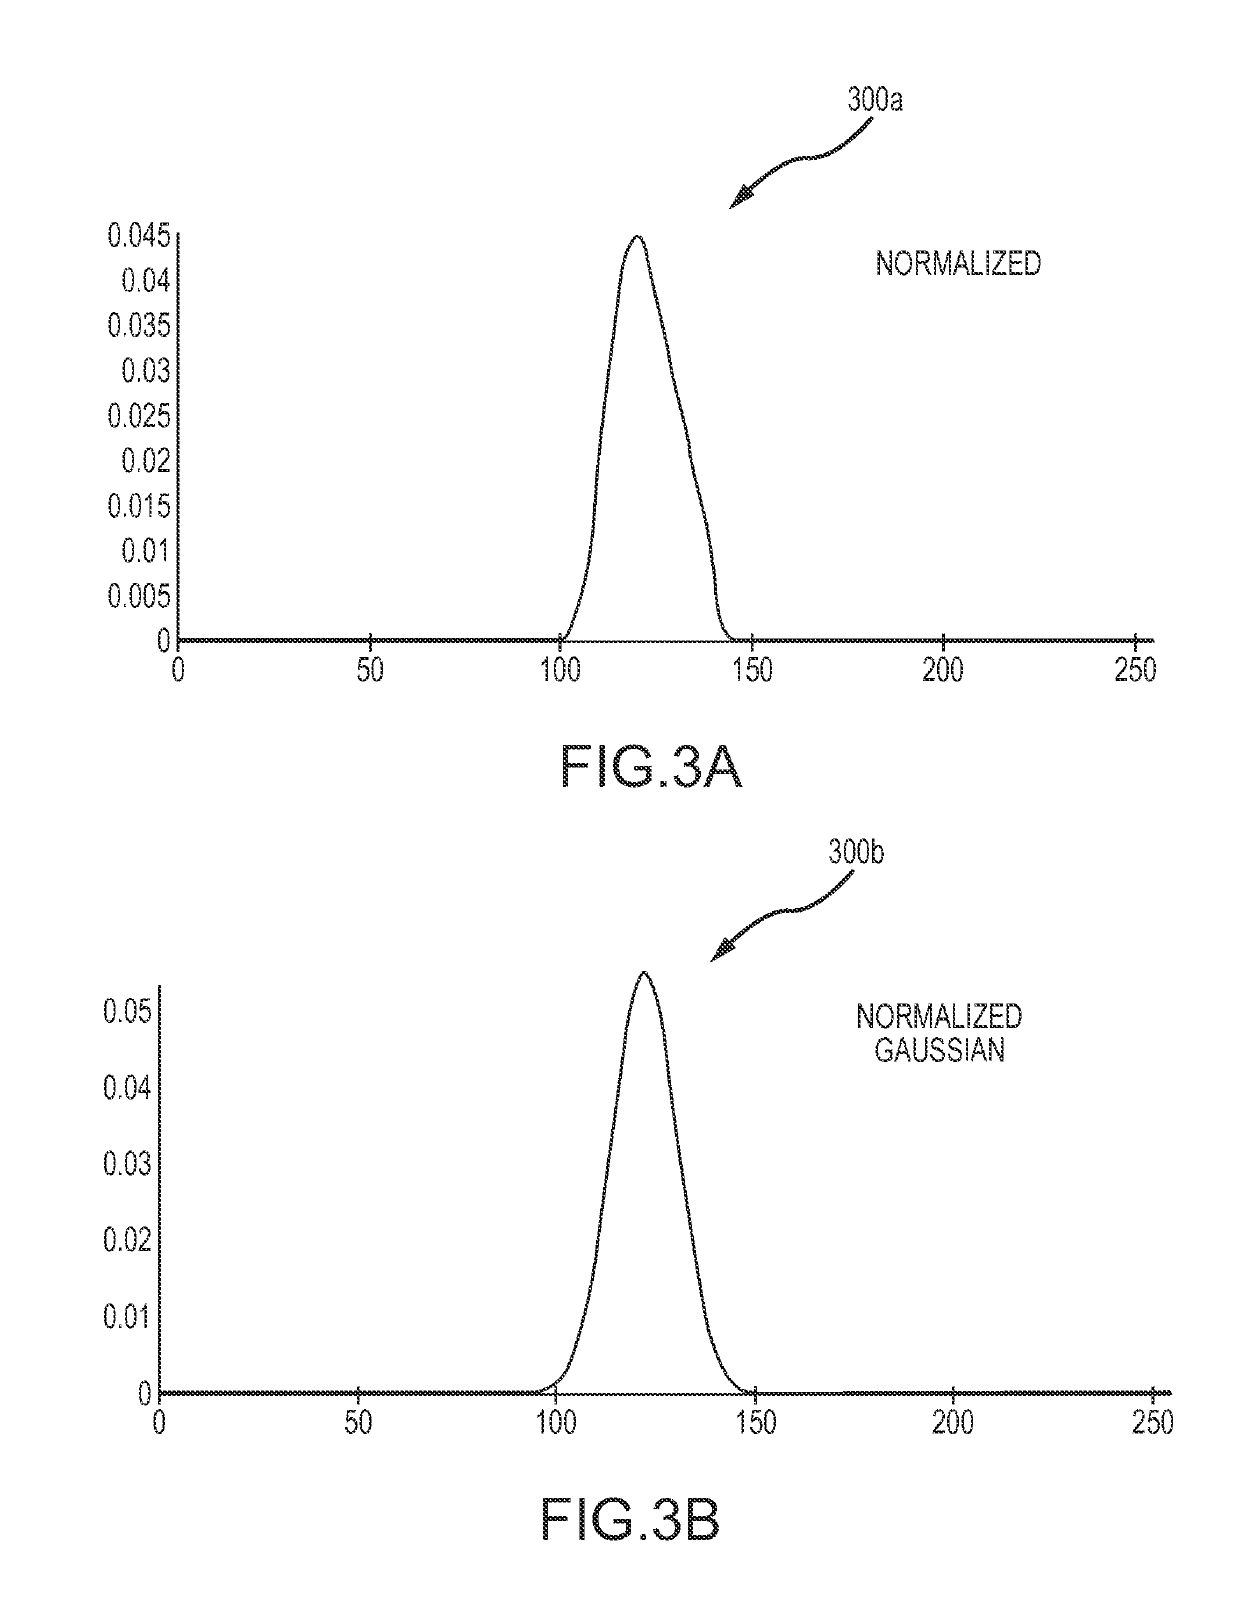 Flow cytometry data segmentation result evaluation systems and methods